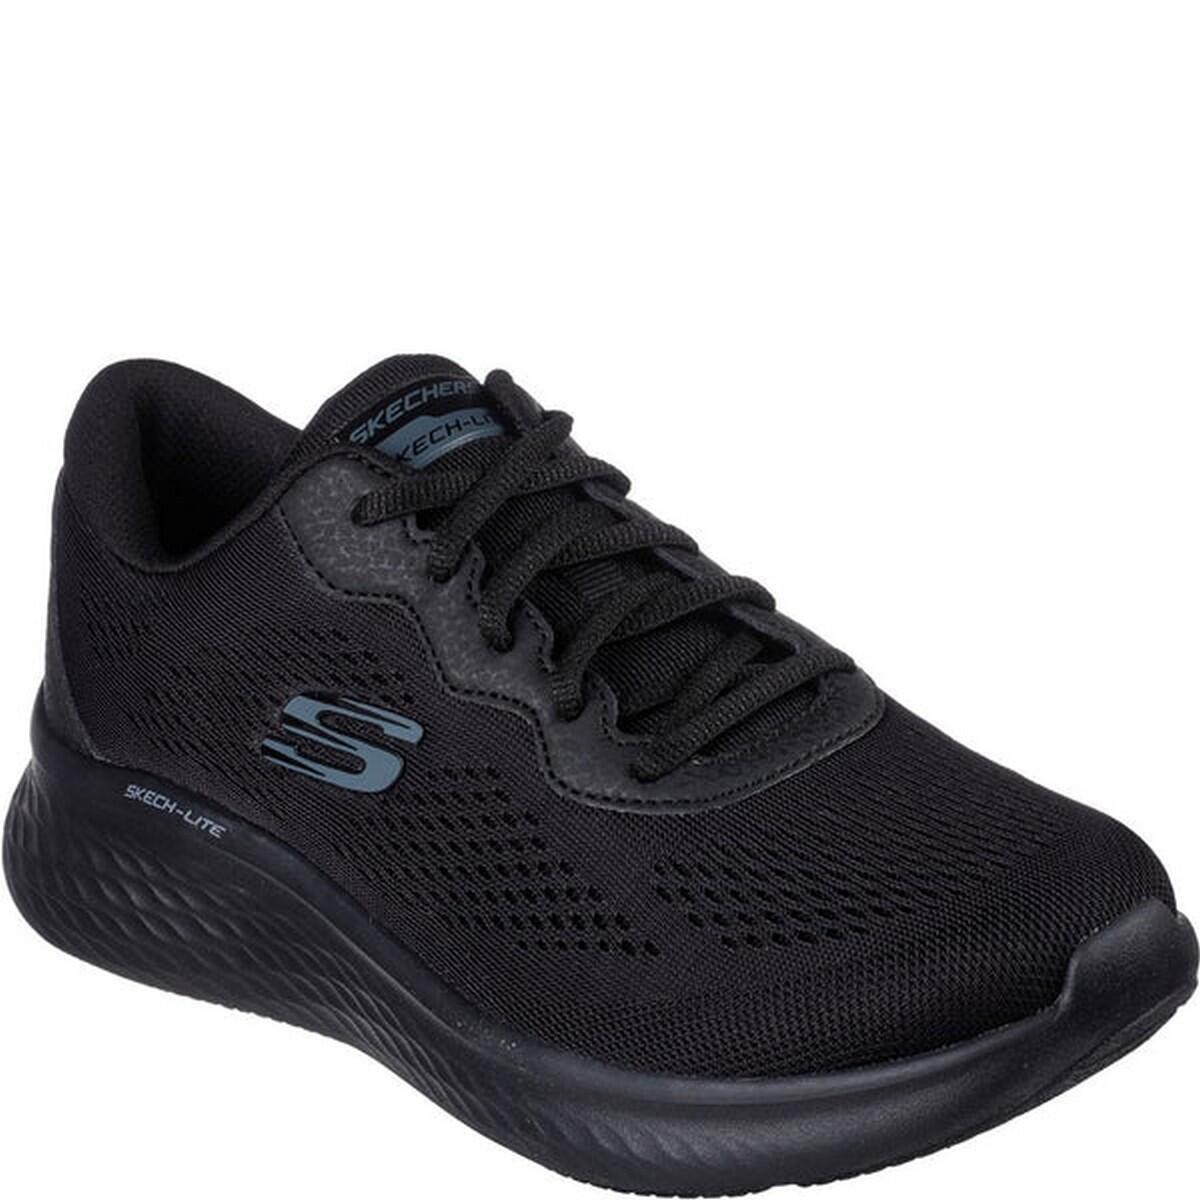 SKECHERS Womens/Ladies SkechLite Pro Perfect Time Trainers (Black)